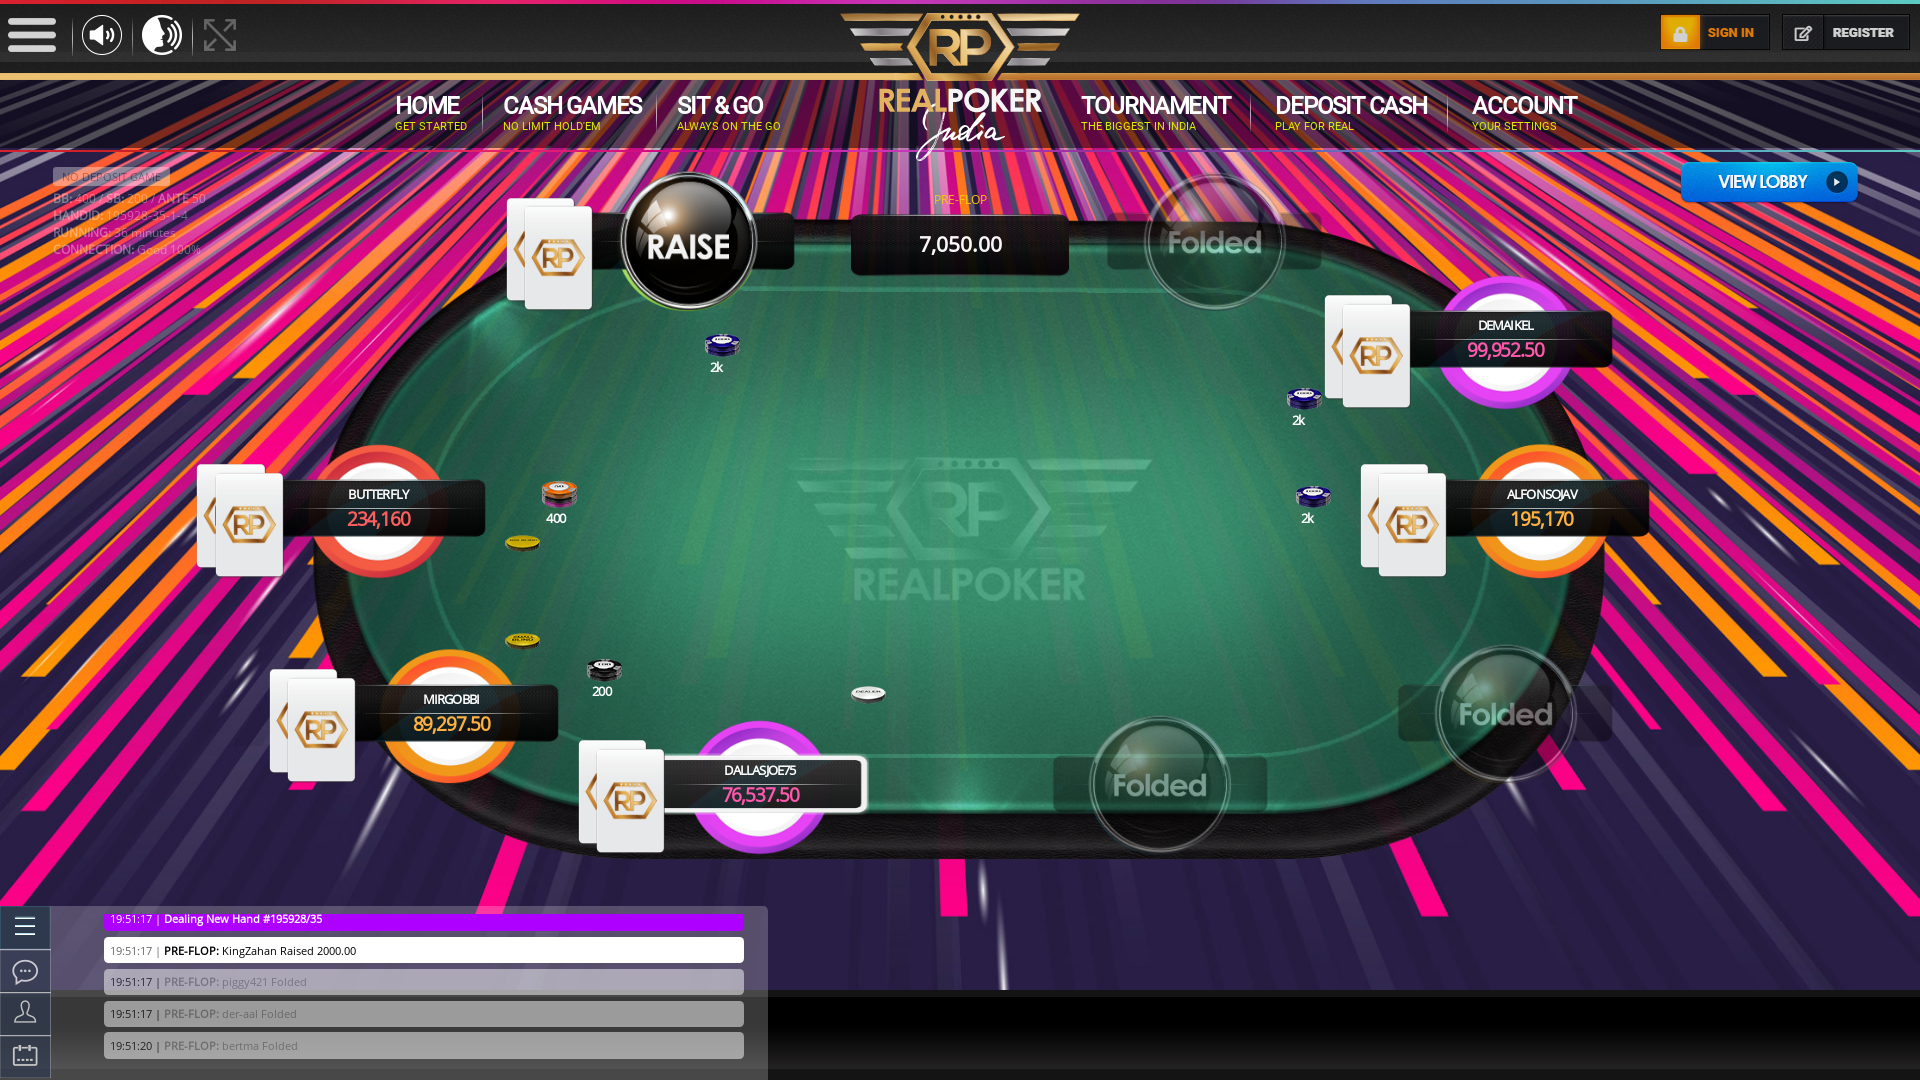 Alipore, Kolkata real poker on a 10 player table in the 36th minute of the game